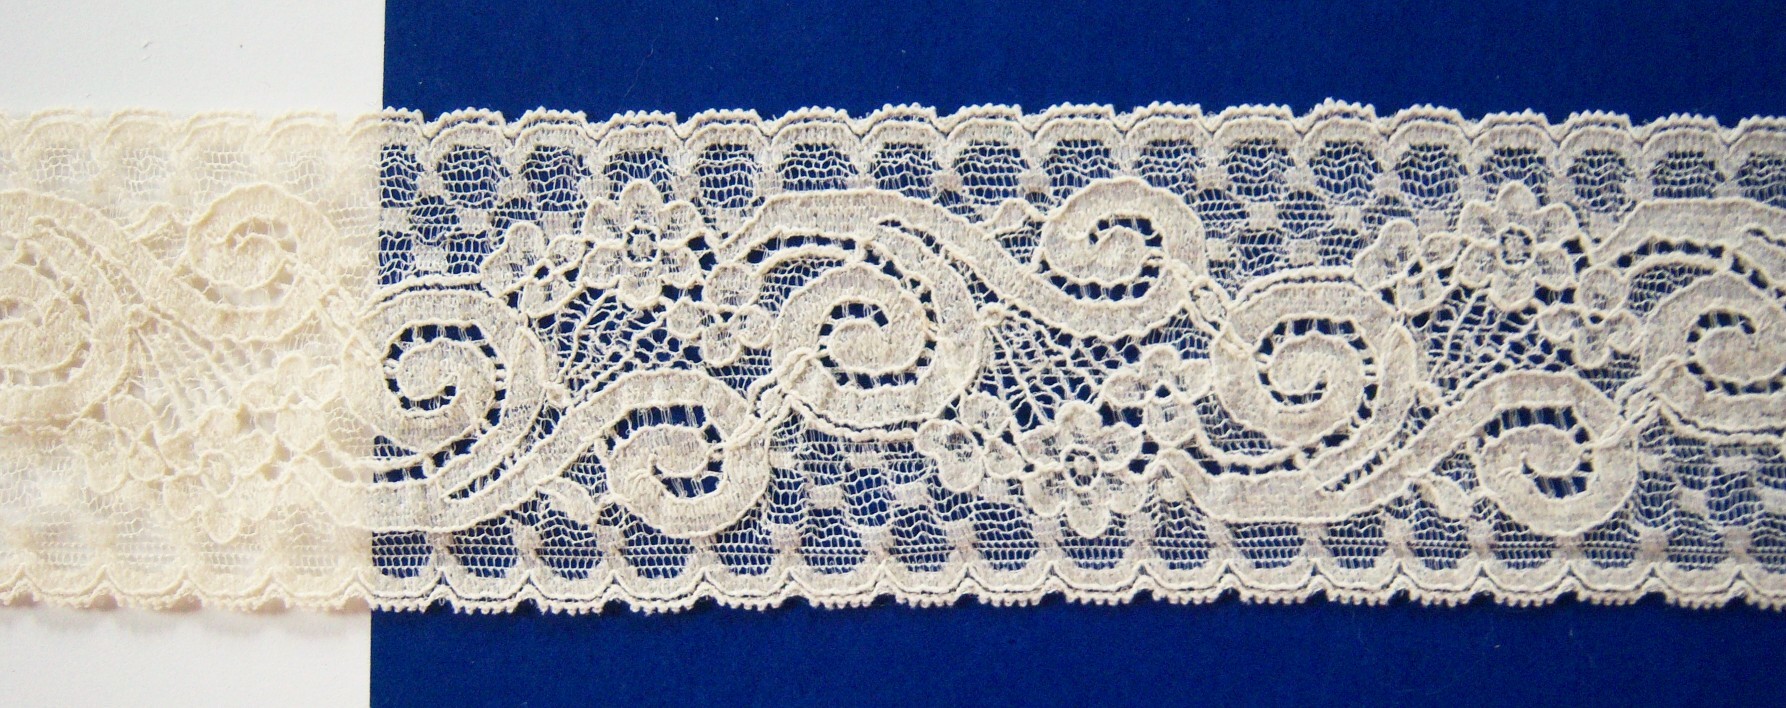 French Nude 2 3/4" Stretch Lace